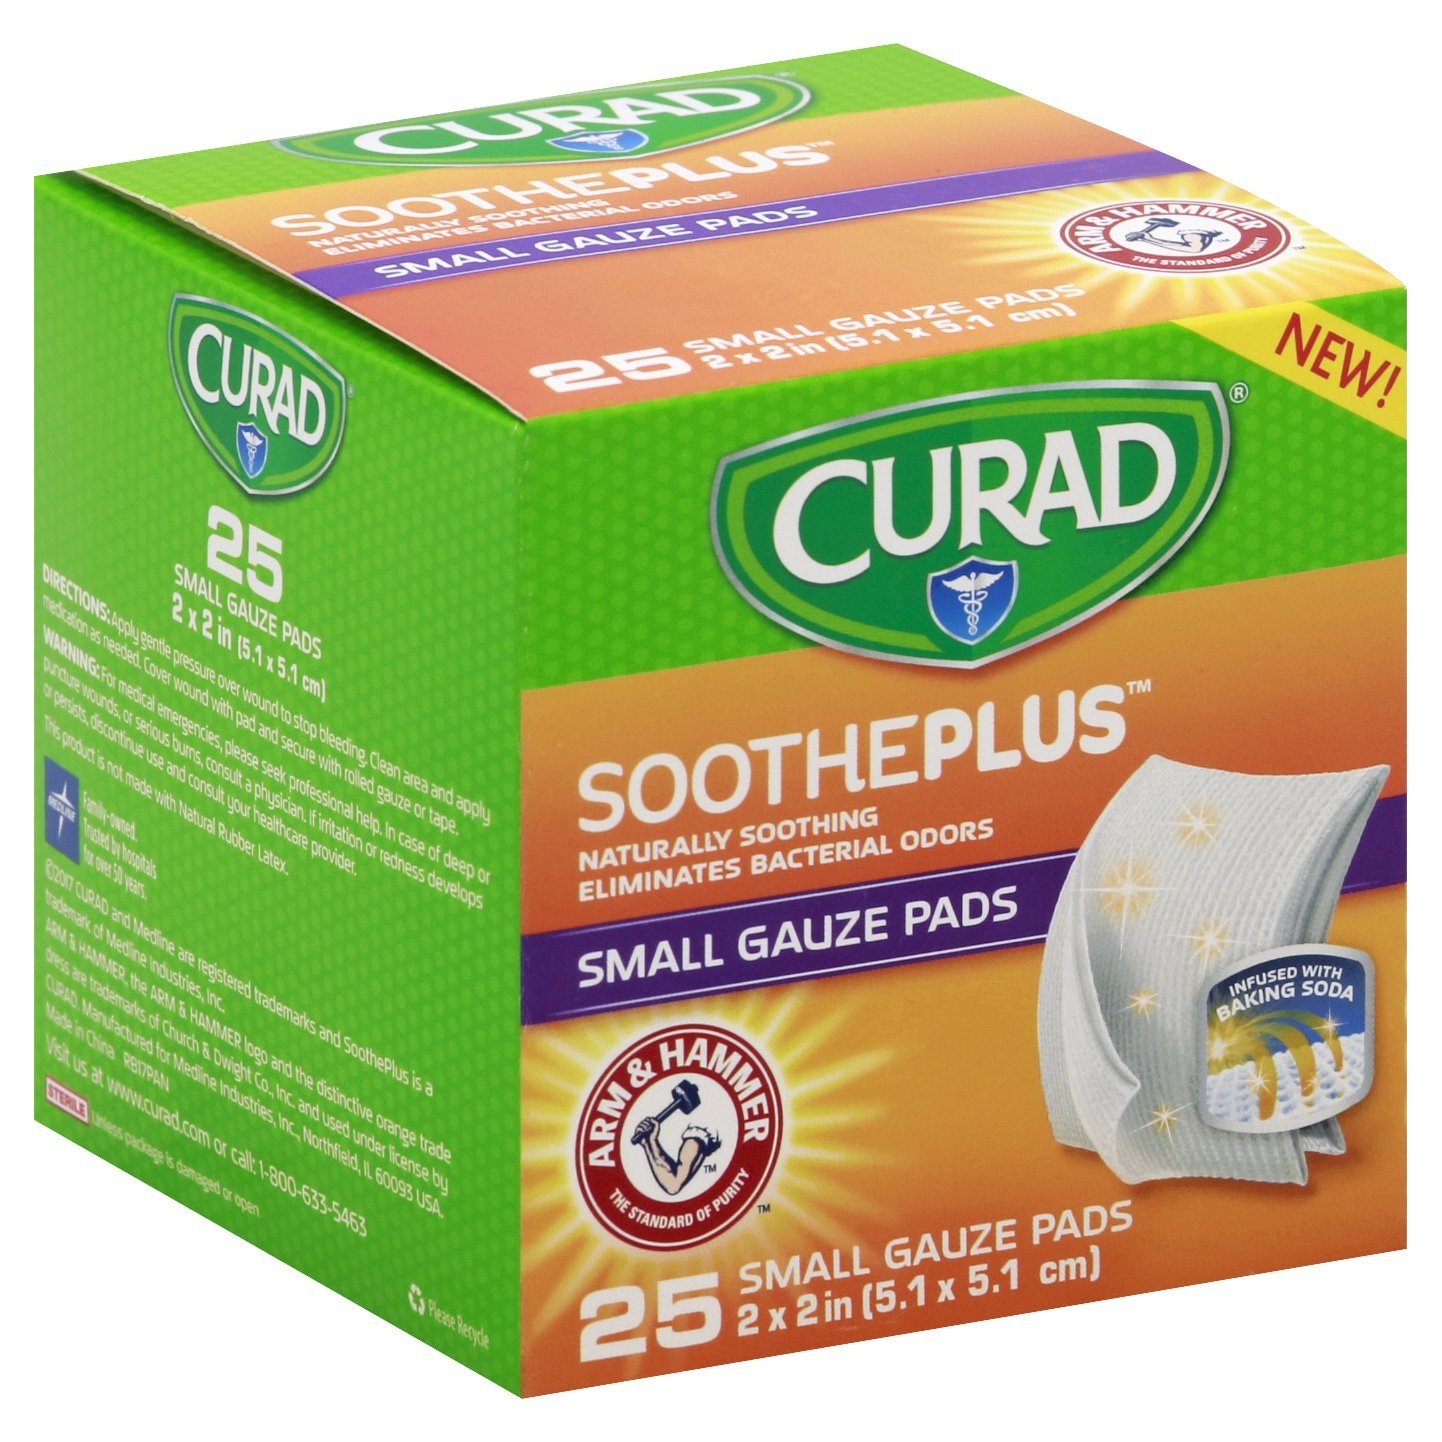 slide 1 of 1, Curad Arm & Hammer Sootheplus Small Gauze Pads 2X2, 25 ct